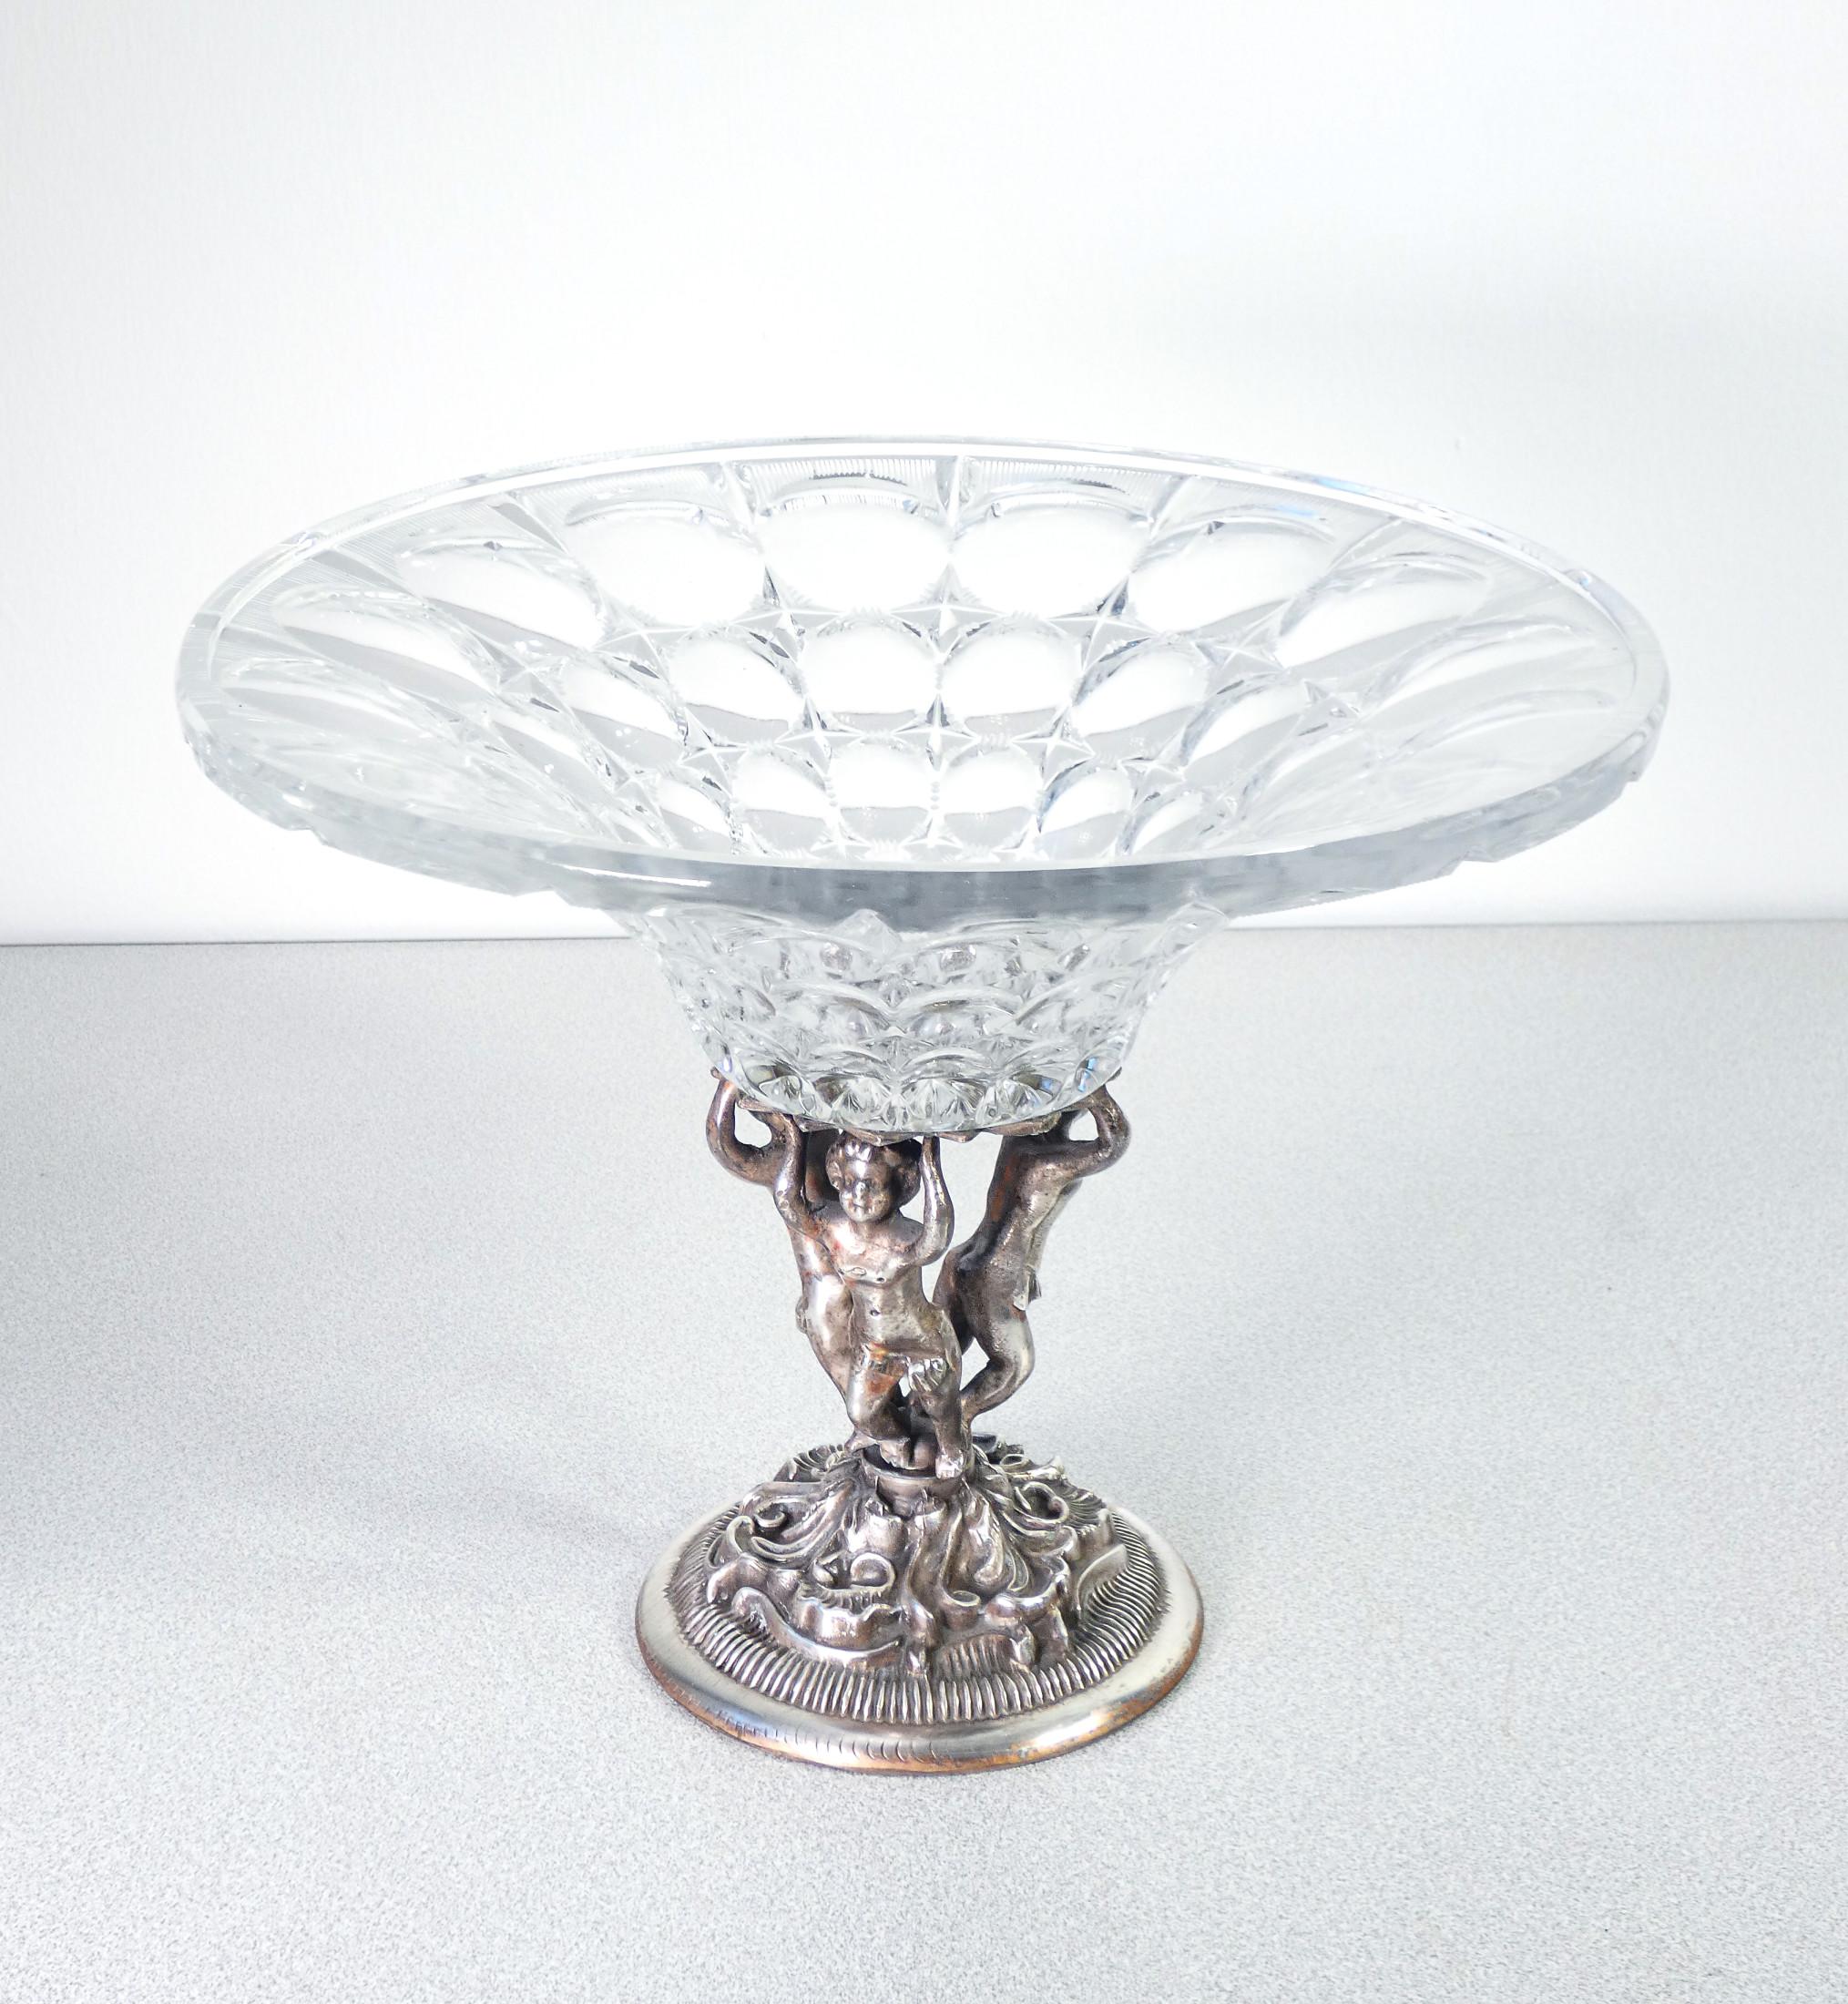 Tray in cut crystal,
base with sculptures
of putti in sheffield.

Period
Early twentieth century
Materials
Cut crystal, sheffield
Dimensions
Ø 31 cm
H 24 cm
Conditions
The piece is in very good condition, as can be seen from the attached